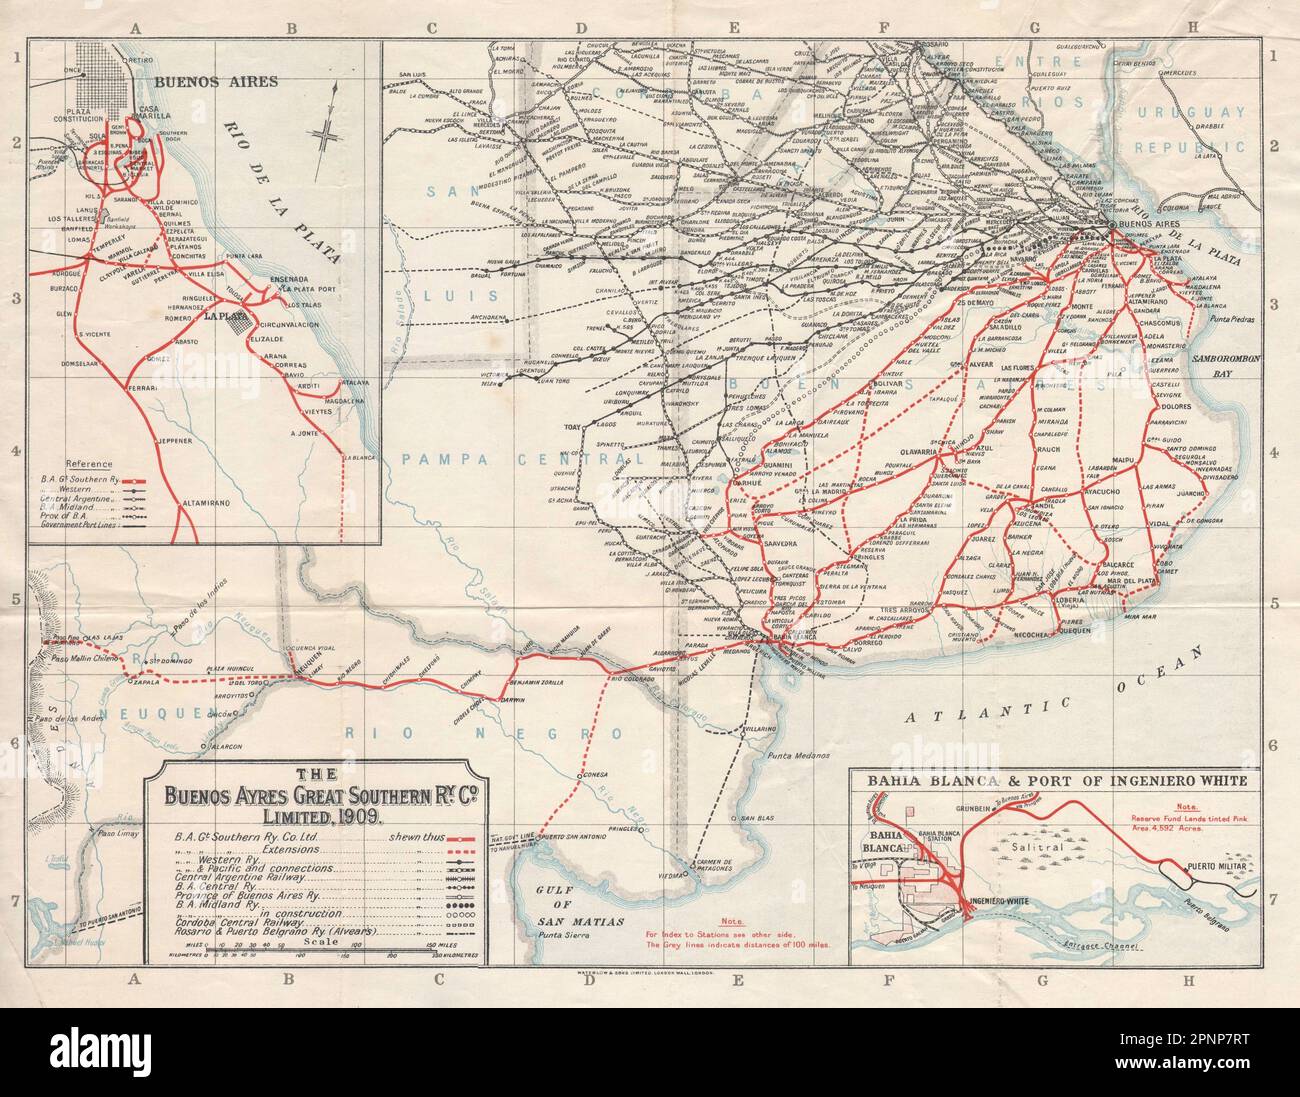 Buenos Ayres [Aires] Great Southern Railway. Bahia Blanca 1909 old antique map Stock Photo